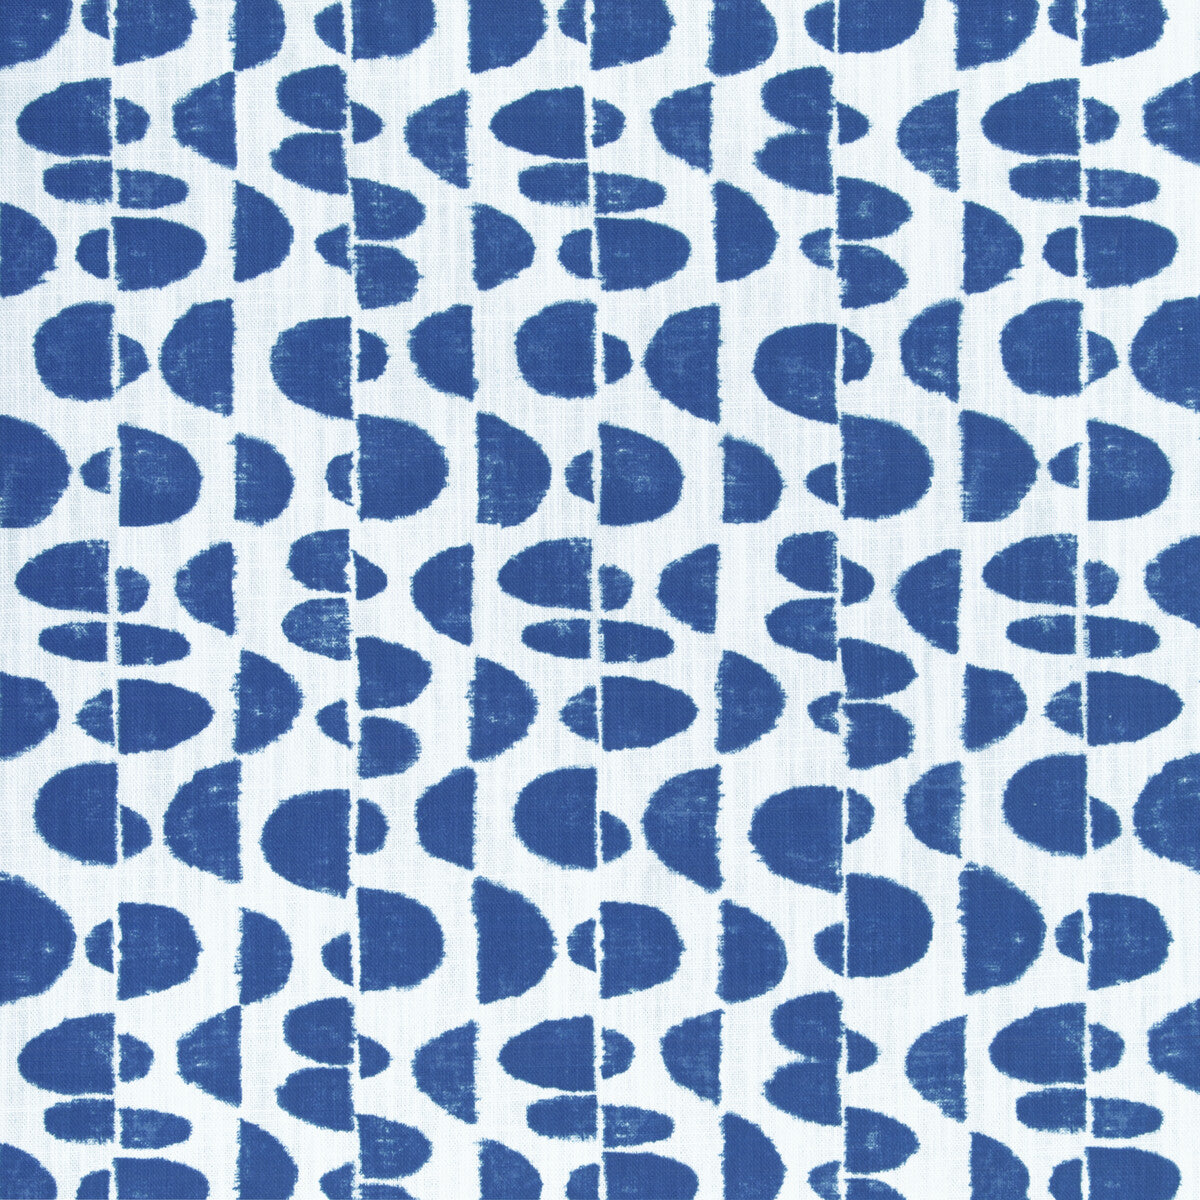 Moon Phase fabric in ink color - pattern MOON PHASE.51.0 - by Kravet Basics in the Small Scale Prints collection